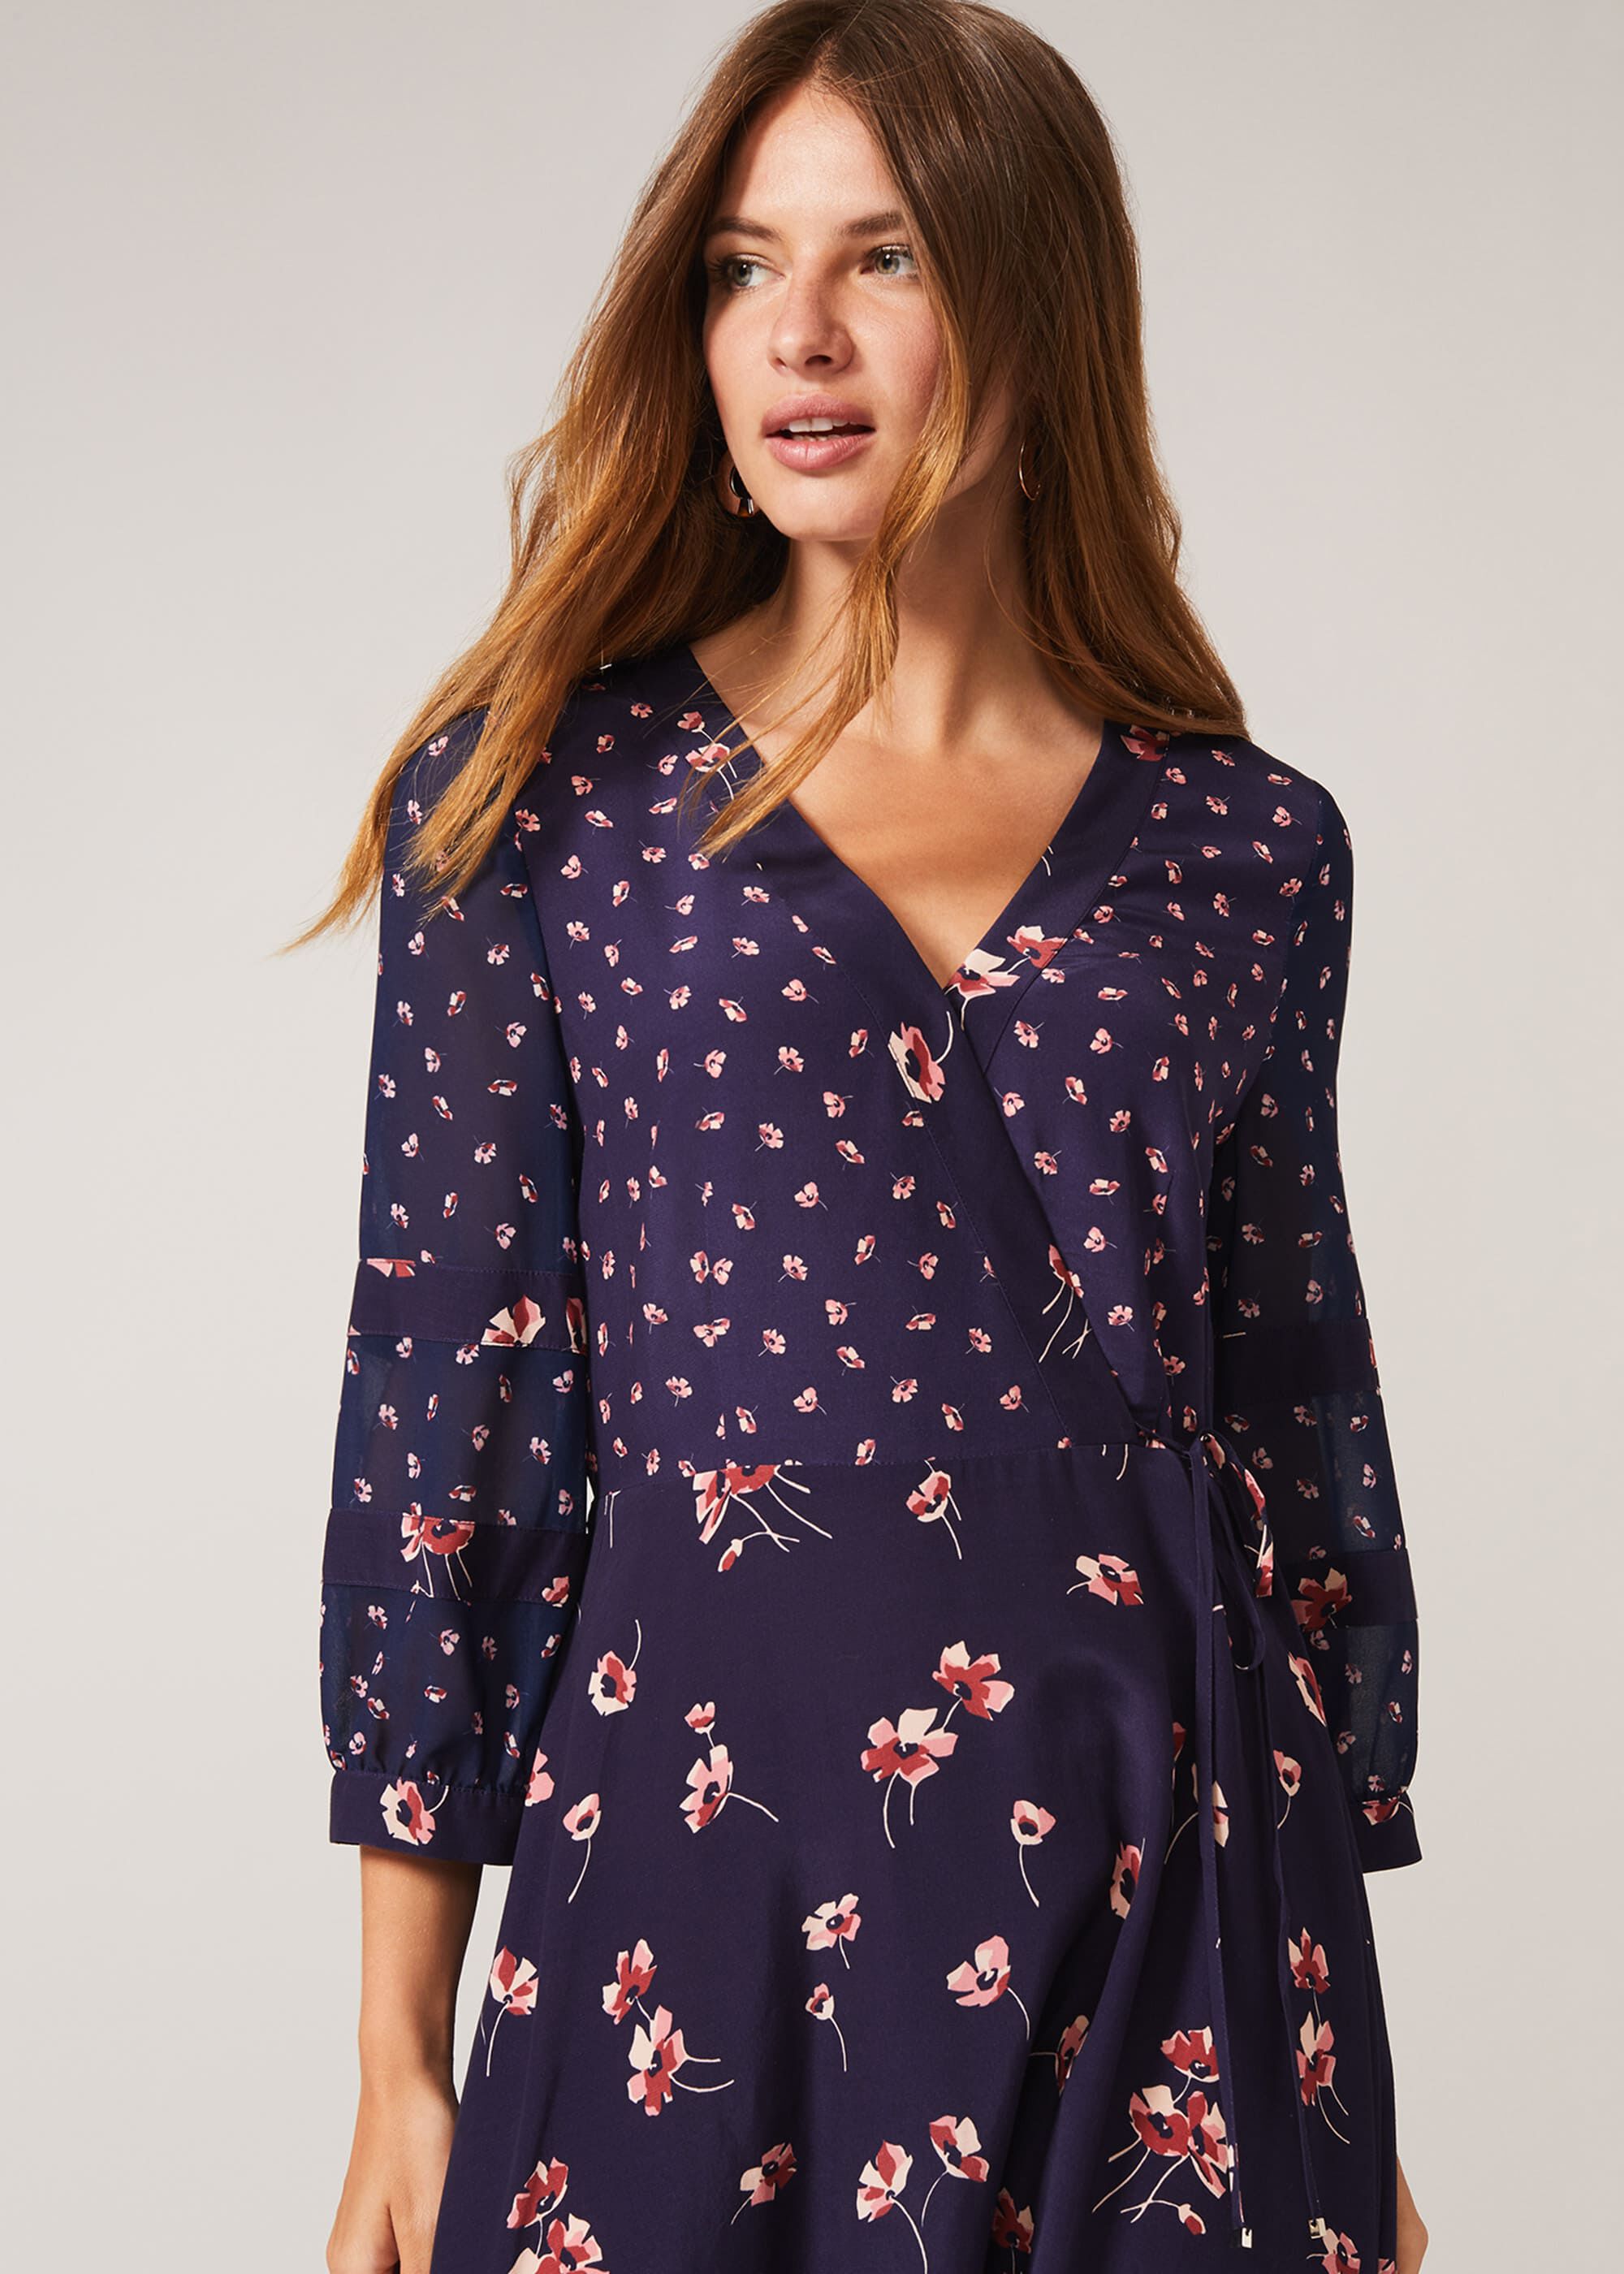 Anemone Mixed Floral Print Dress